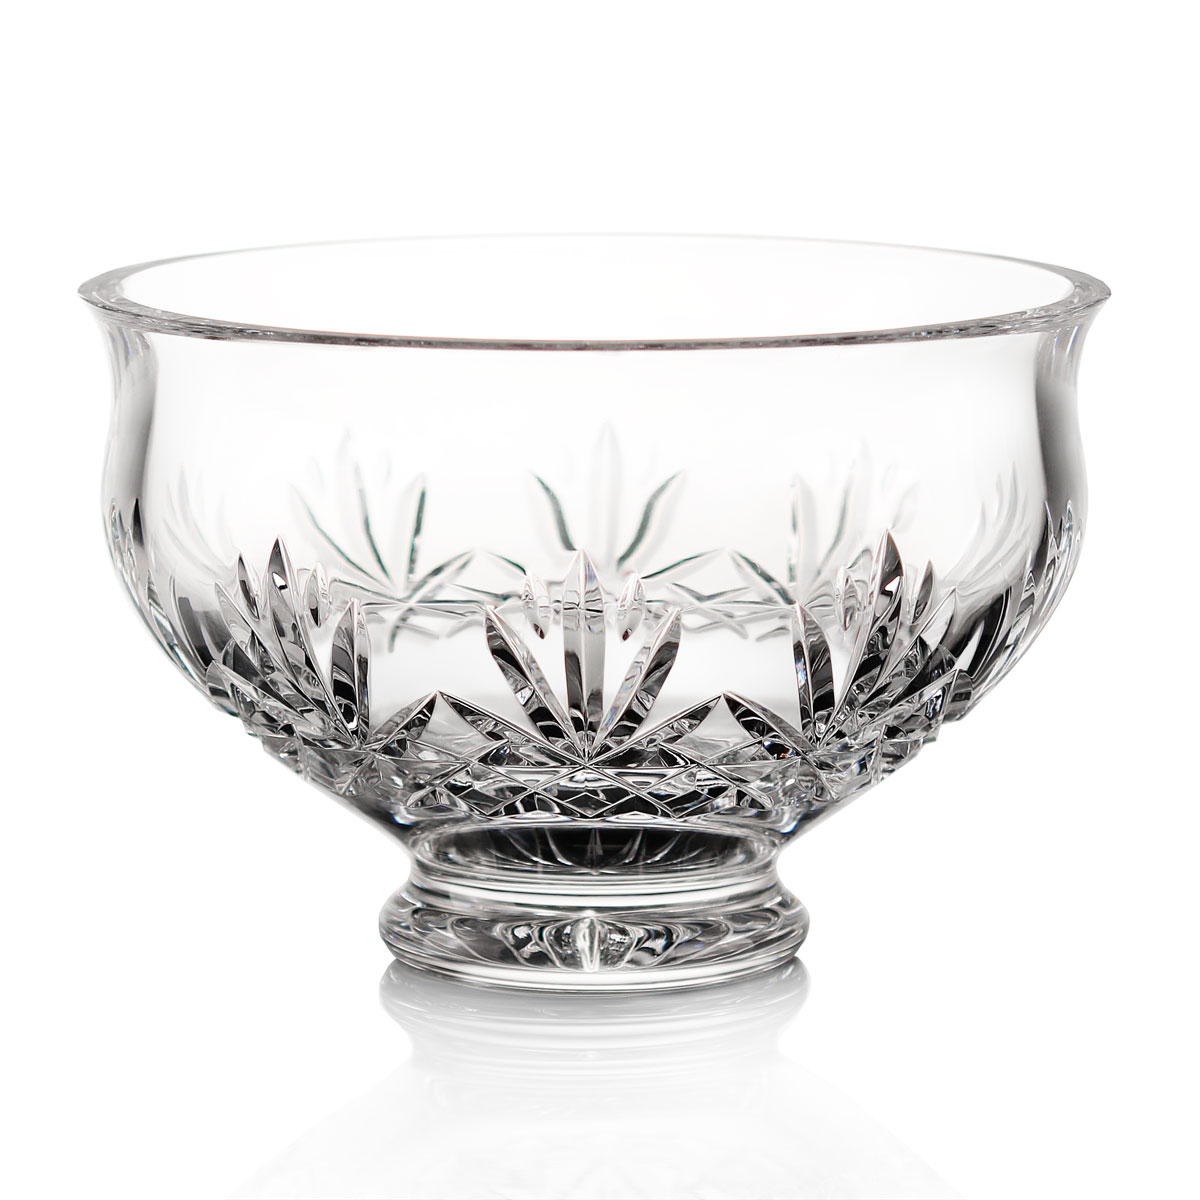 Cashs Ireland Annestown Footed 8" Crystal Bowl